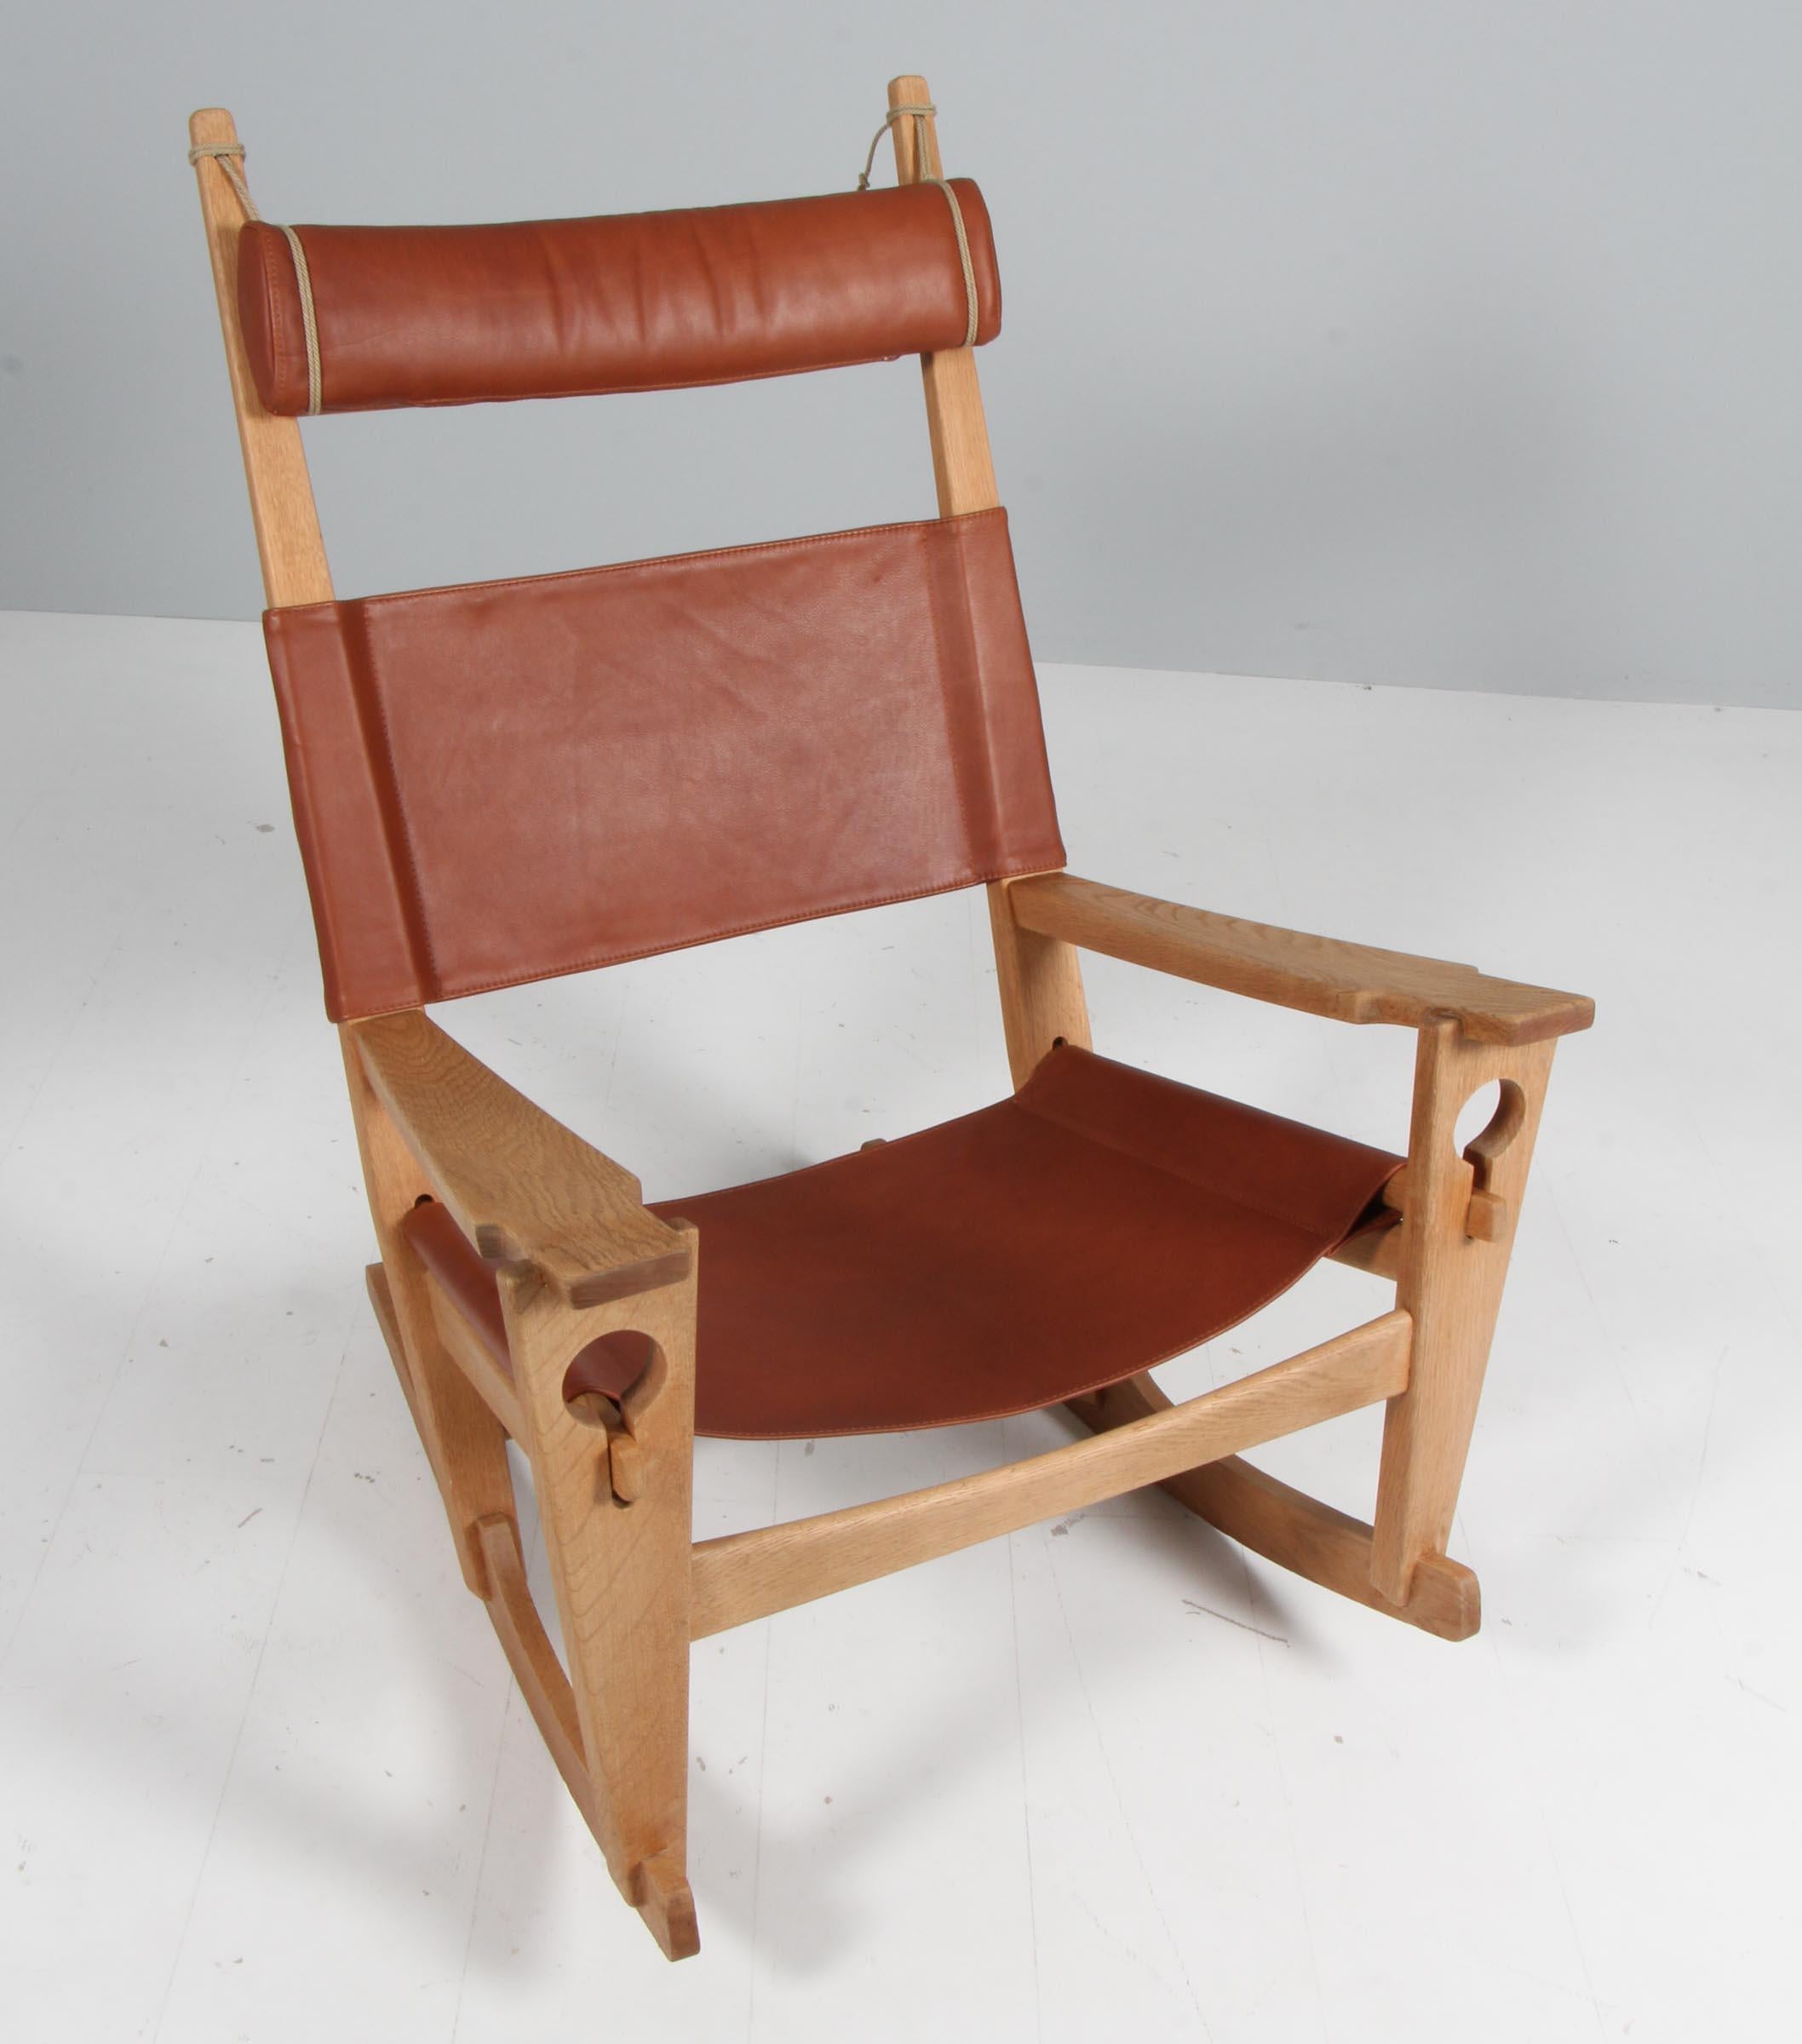 Hans J. Wegner lounge chair / rocking chair new upholstered with brandy coloured aniline leather.

Frame of soap treated oak

Model Nøglehullet, made by GETAMA.